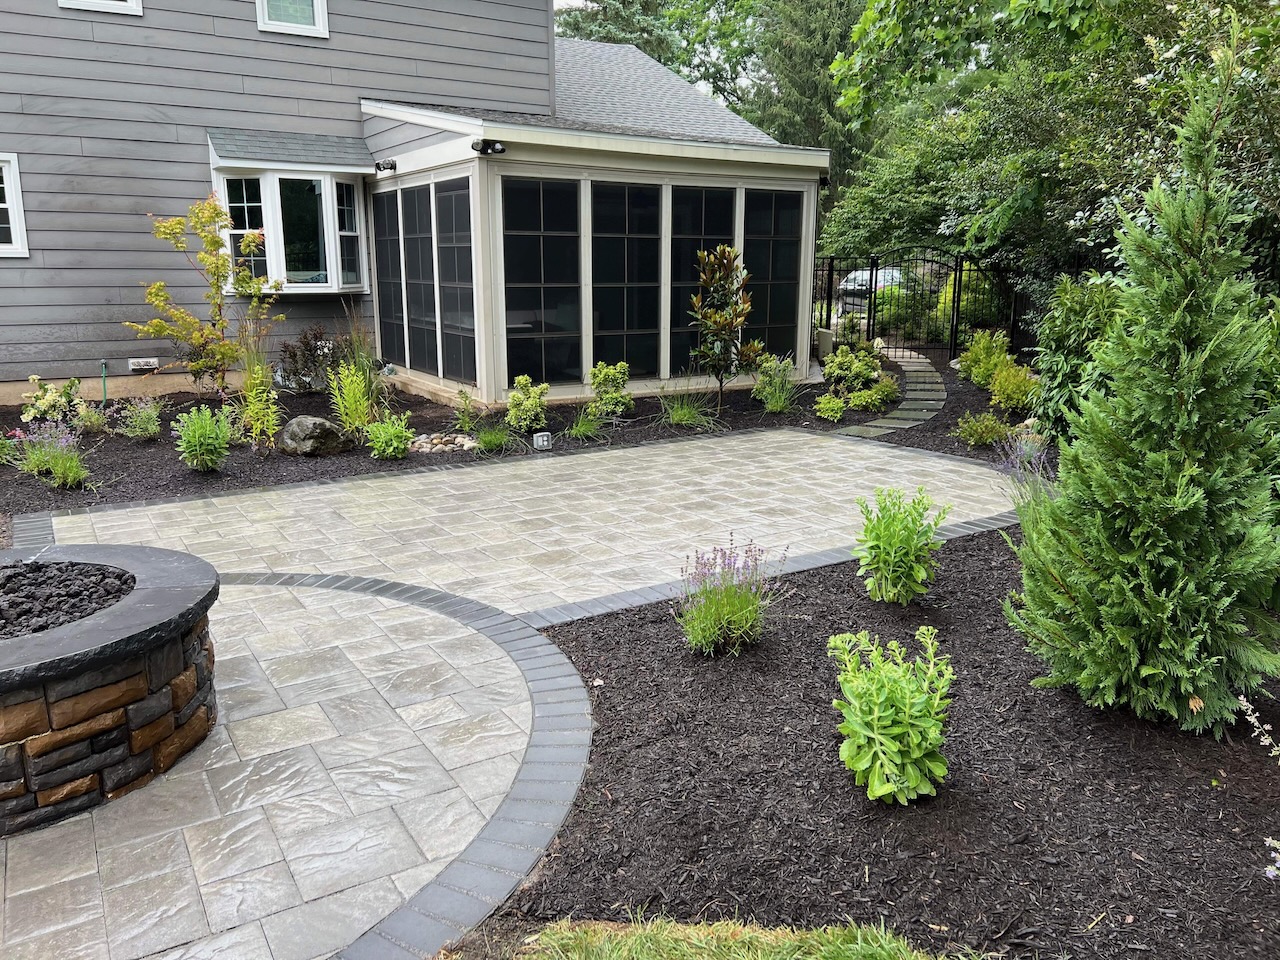 Landscape Maintenance Services in Norristown, PA